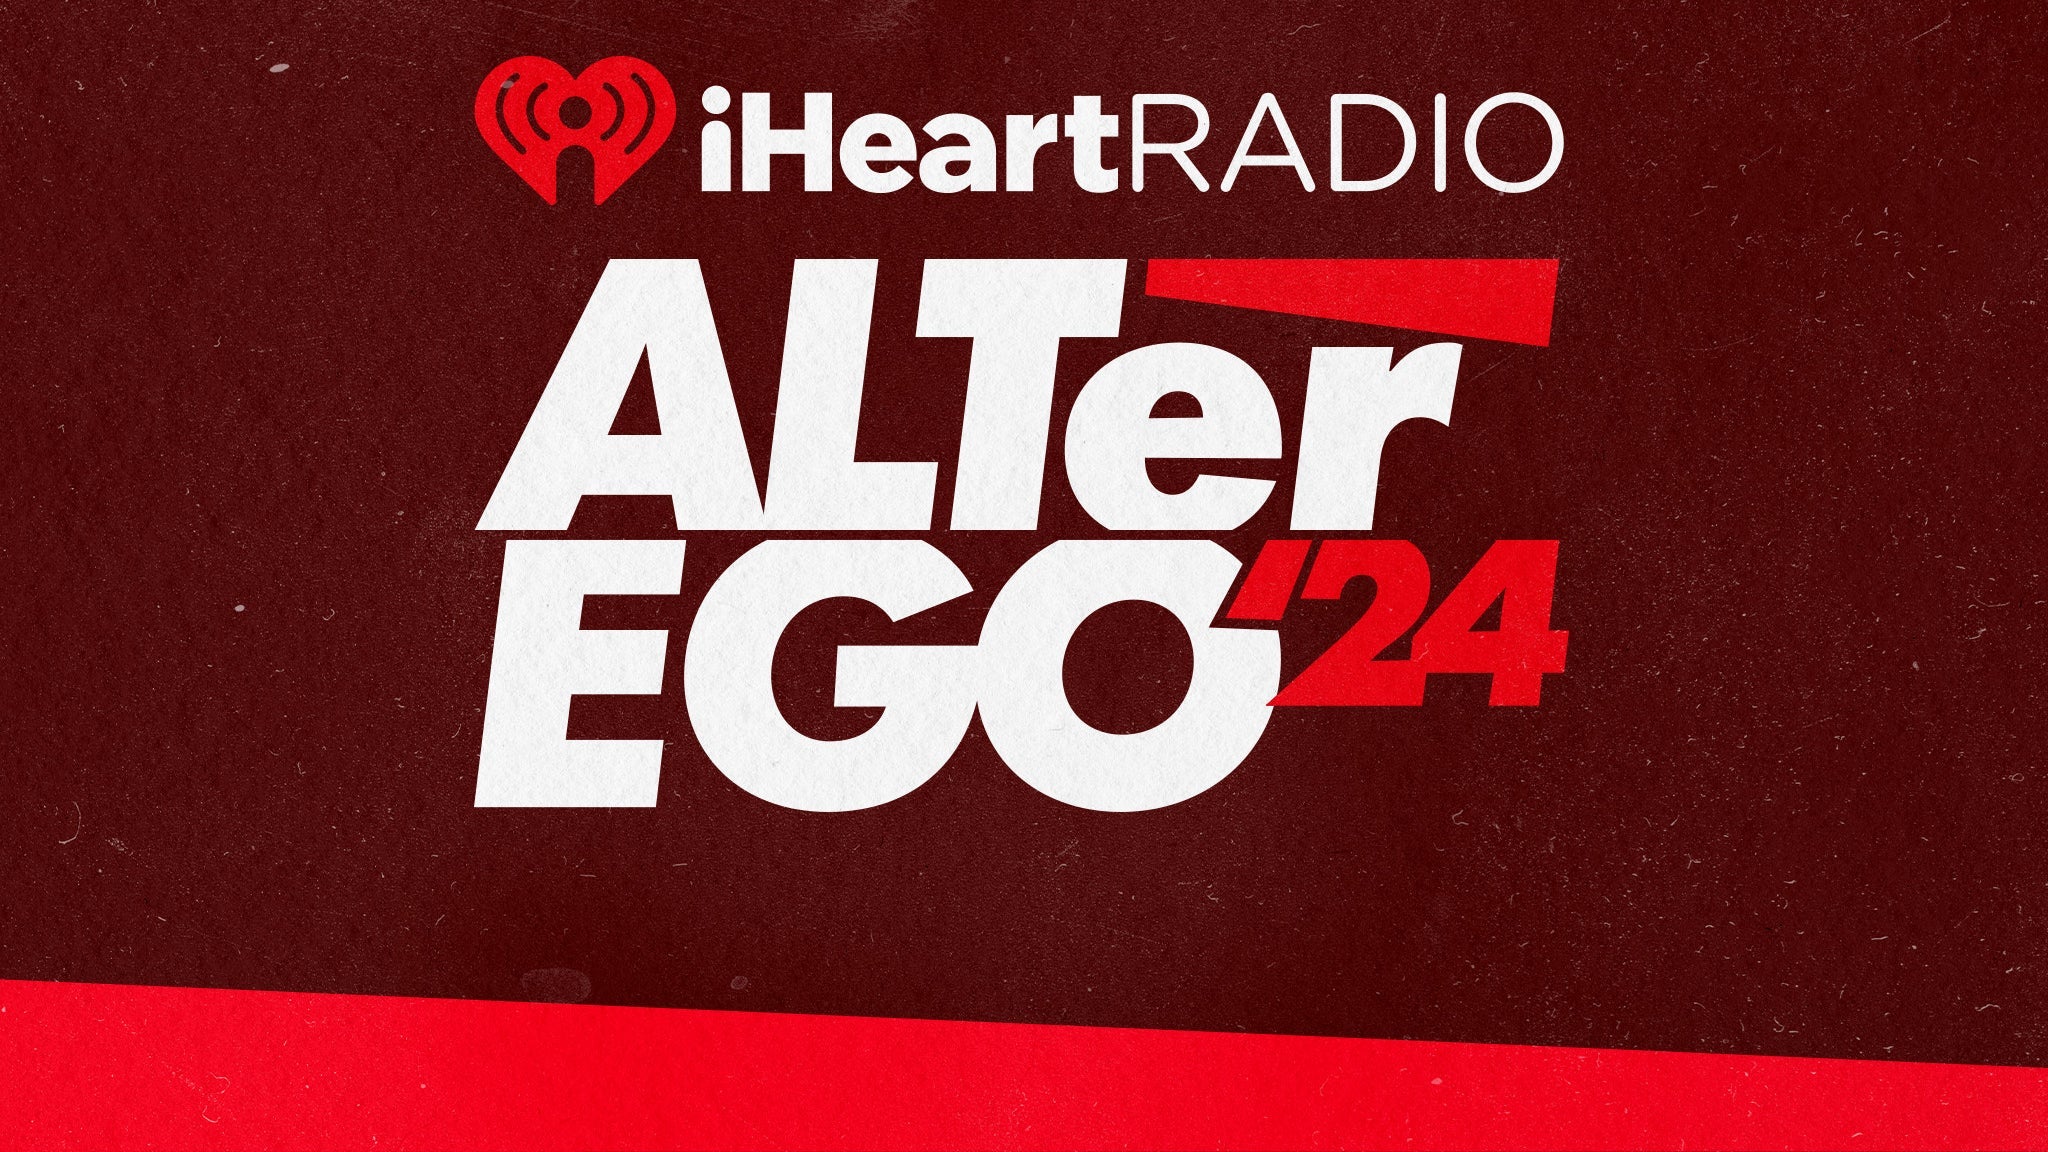 working presale passcode to iHeartRadio ALTer EGO Presented by Capital One tickets in Anaheim at Honda Center